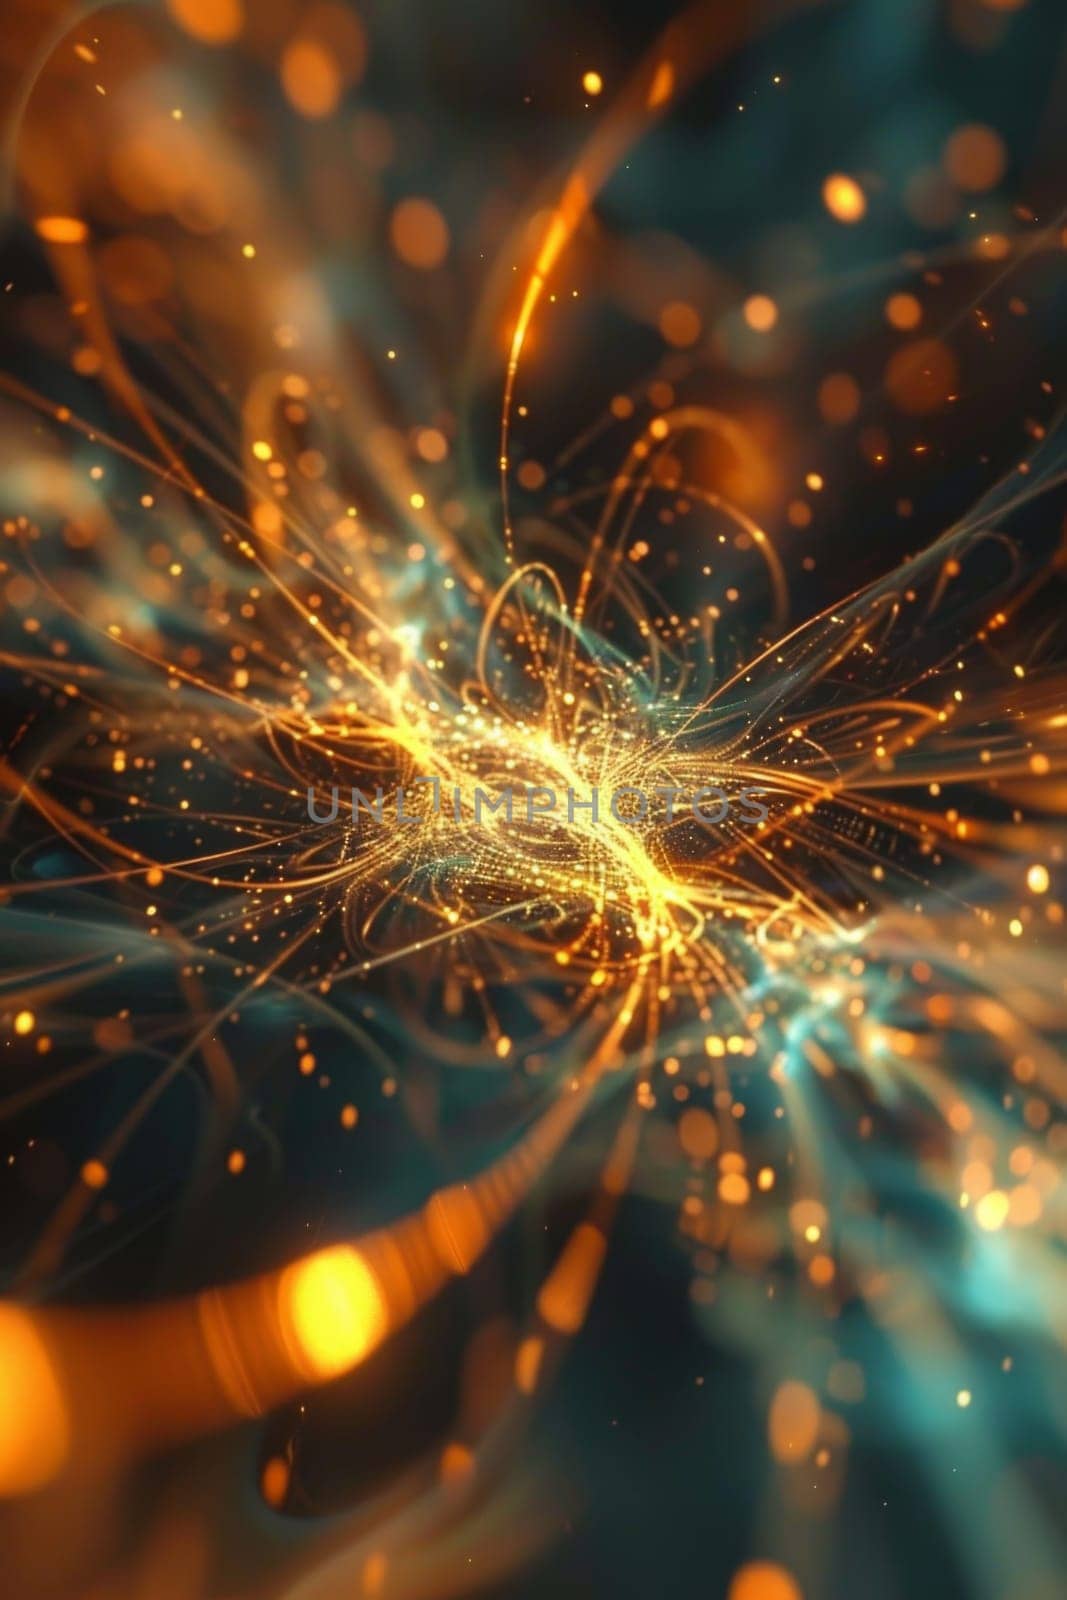 Neural cells with luminous communication nodes in an abstract dark space, 3D illustration.